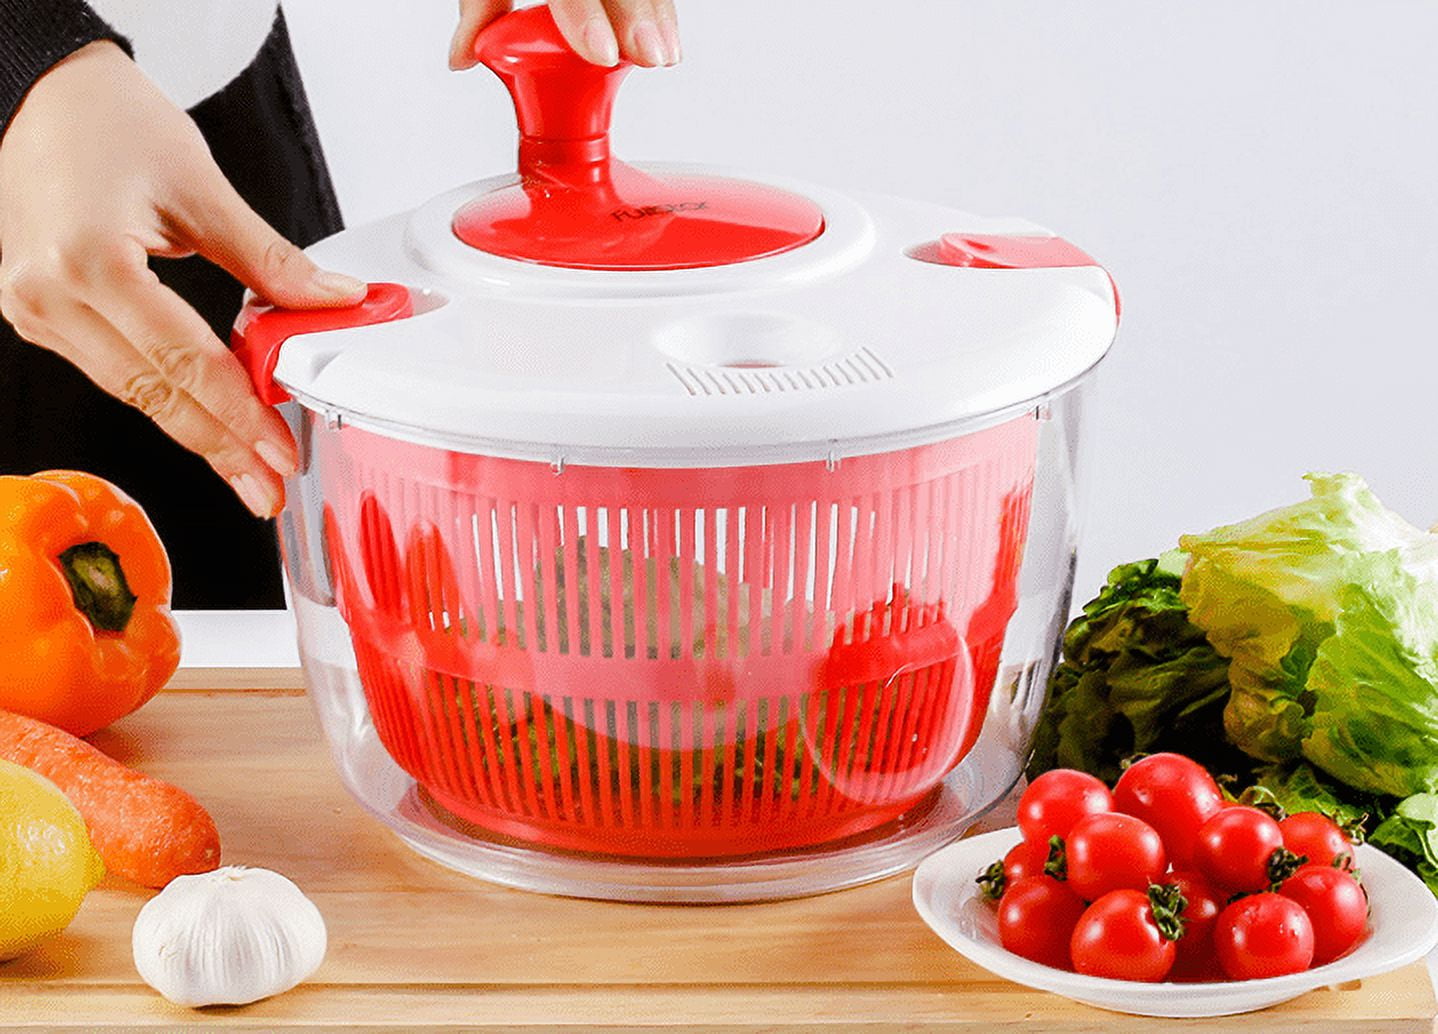 1pc Salad Spinner With Food Grade Material Bowl,Large Manual Salad